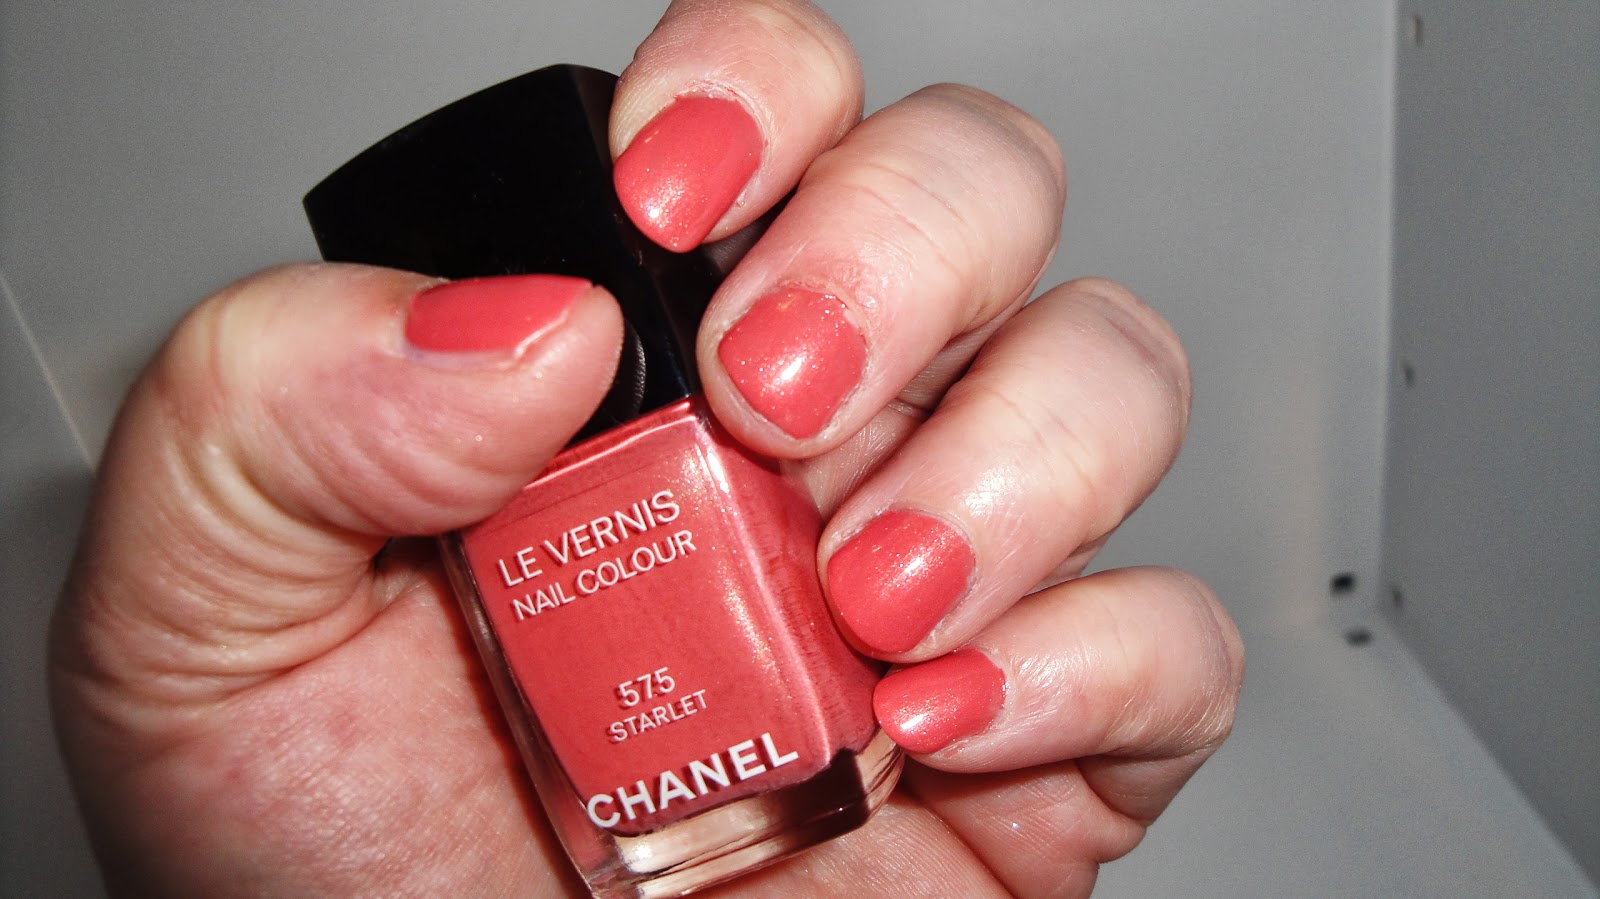 Jayded Dreaming Beauty Blog : 575 STARLET CHANEL LE VERNIS NAIL COLOUR -  SWATCHES AND REVIEW